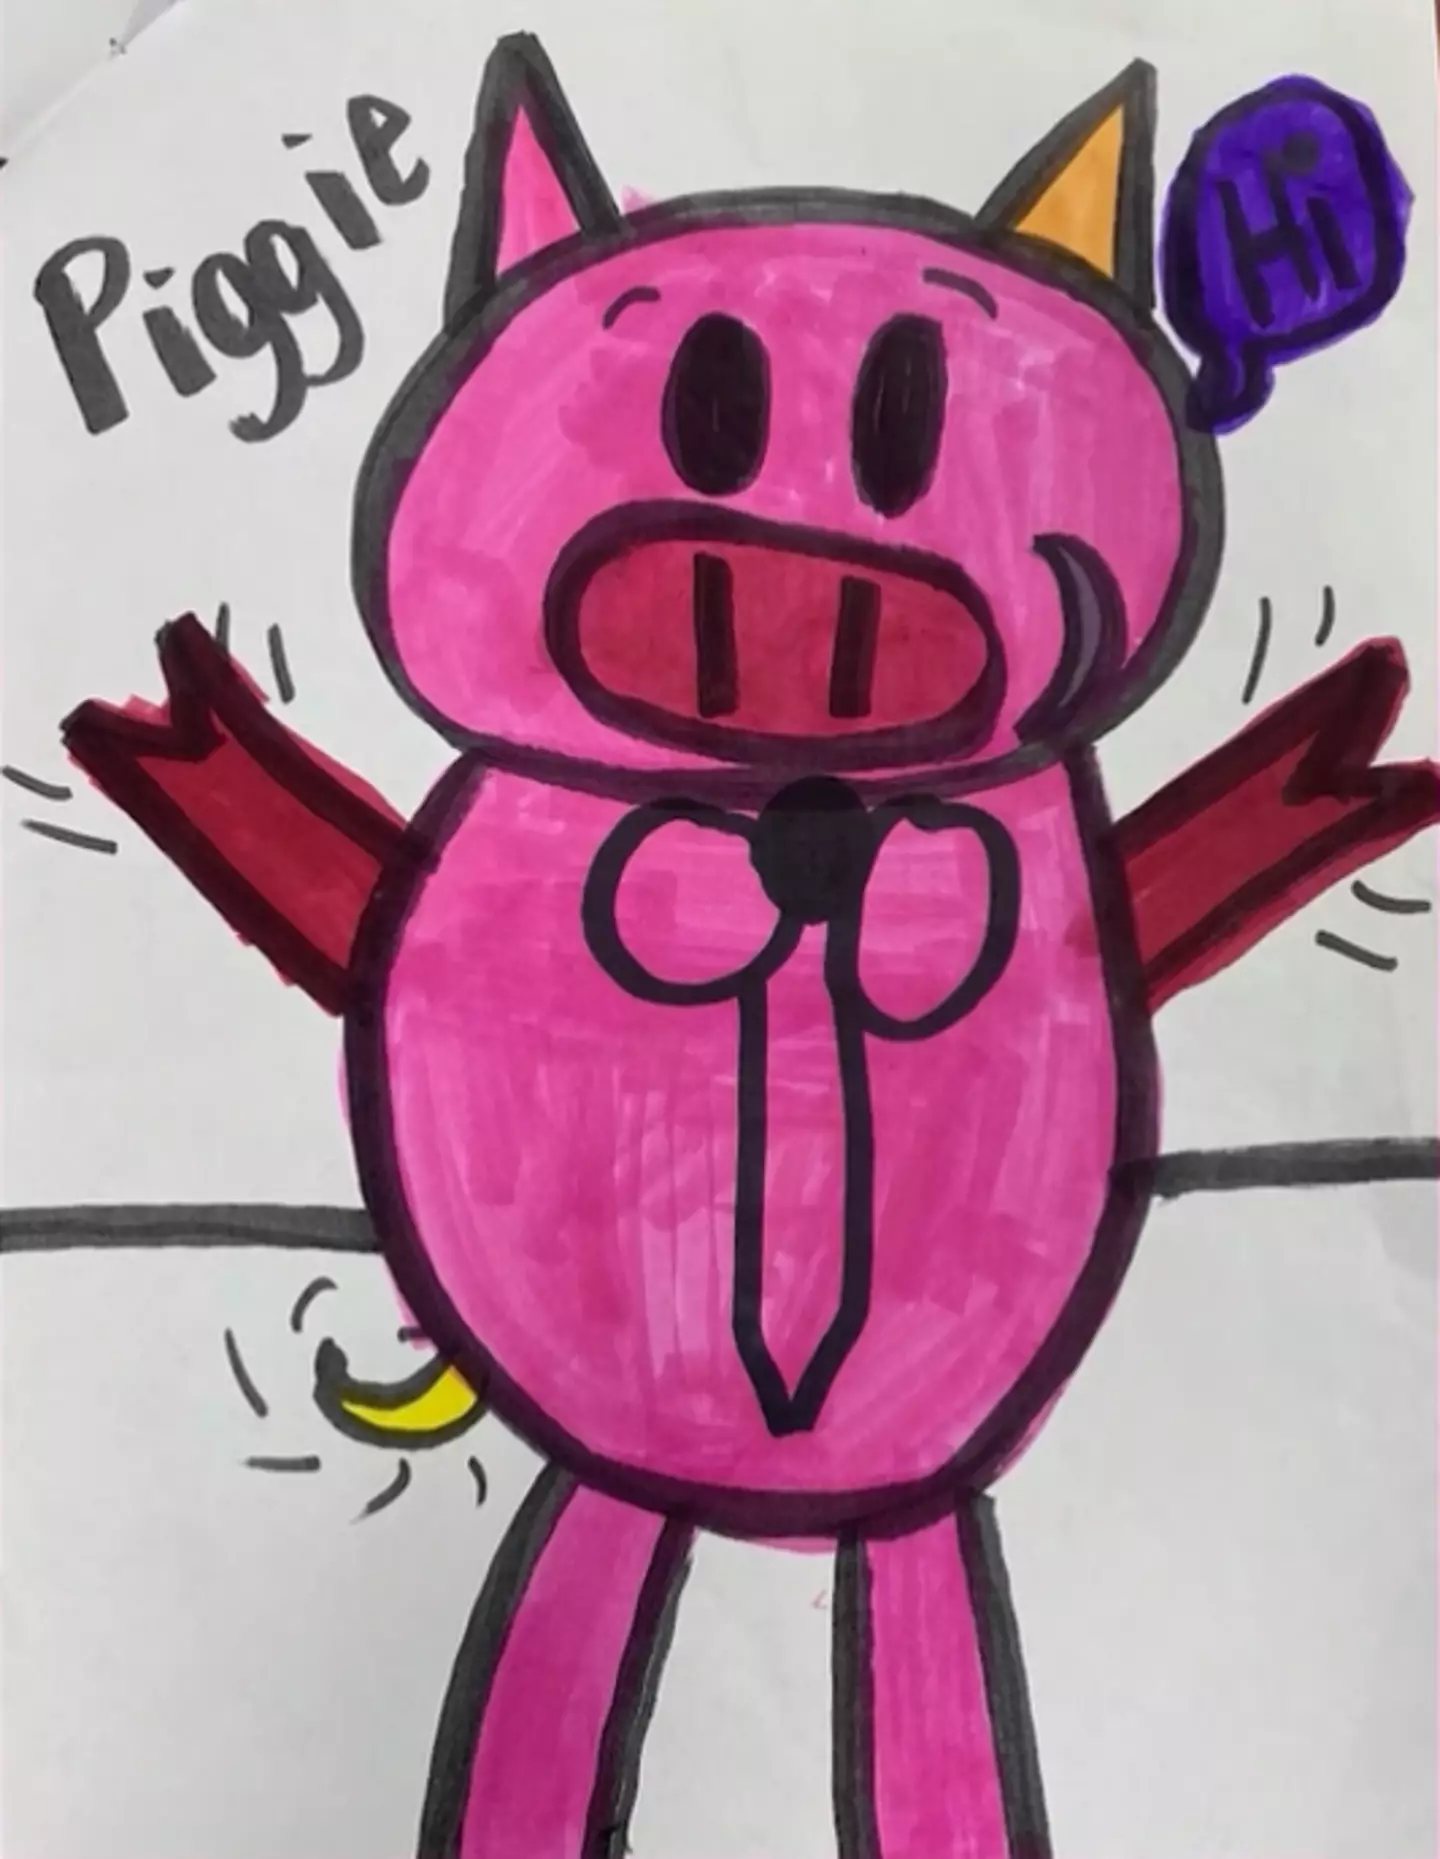 ‘Piggie’ has become the centre of controversy at the school.